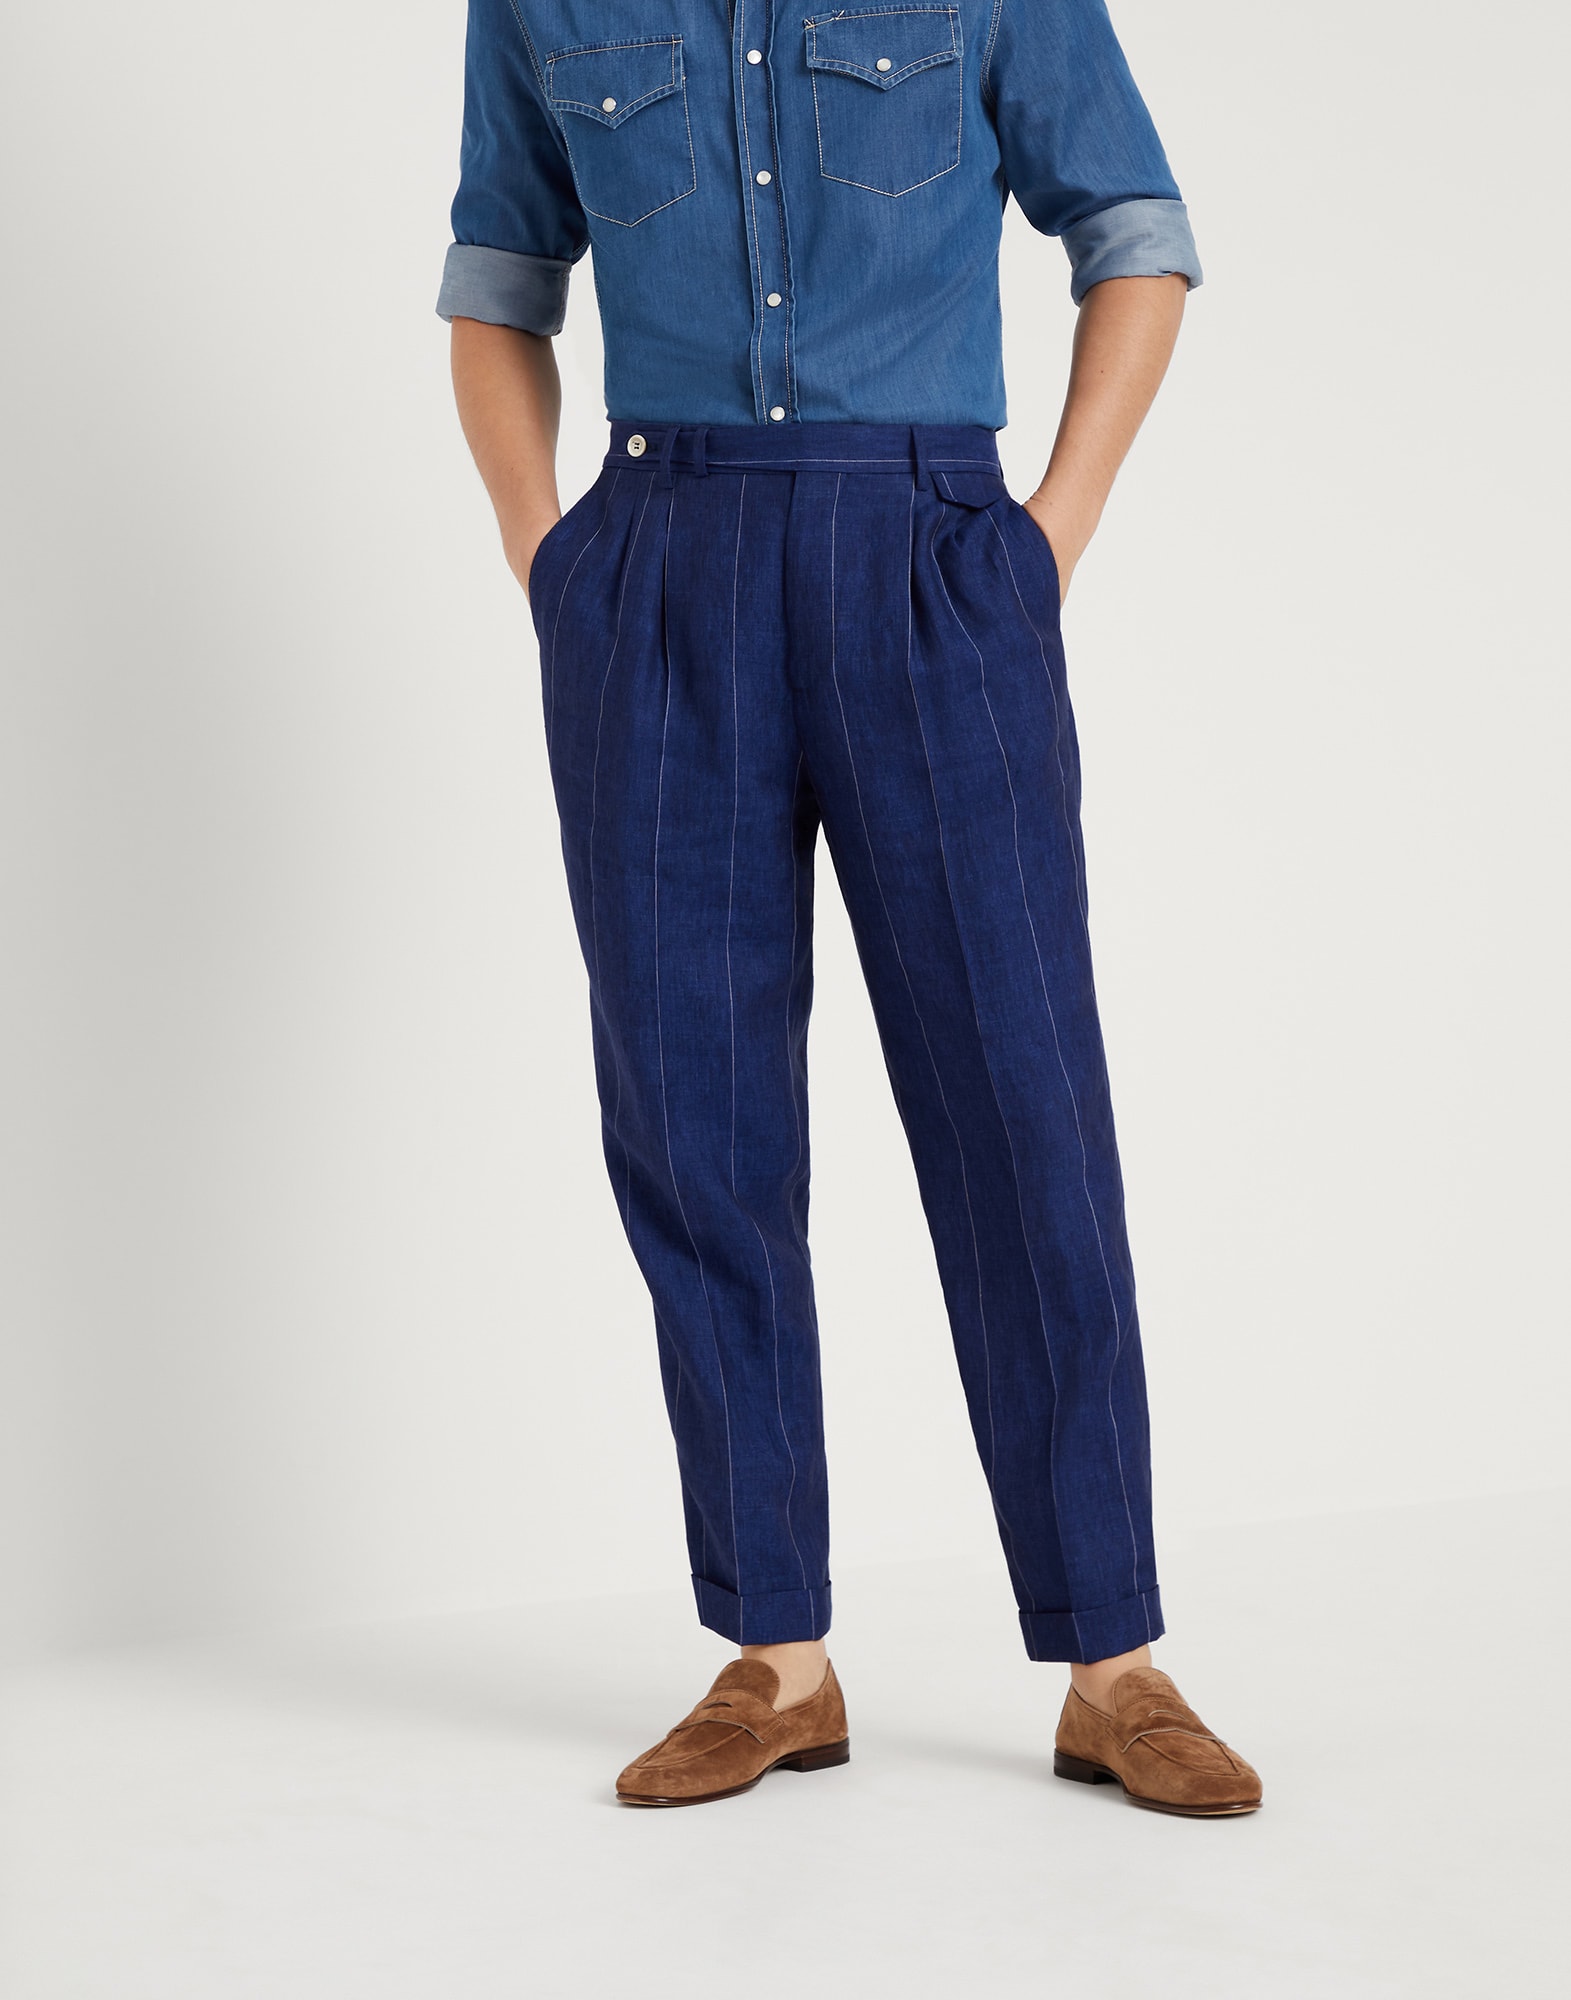 Leisure fit trousers with double pleats Indigo Man - Brunello Cucinelli